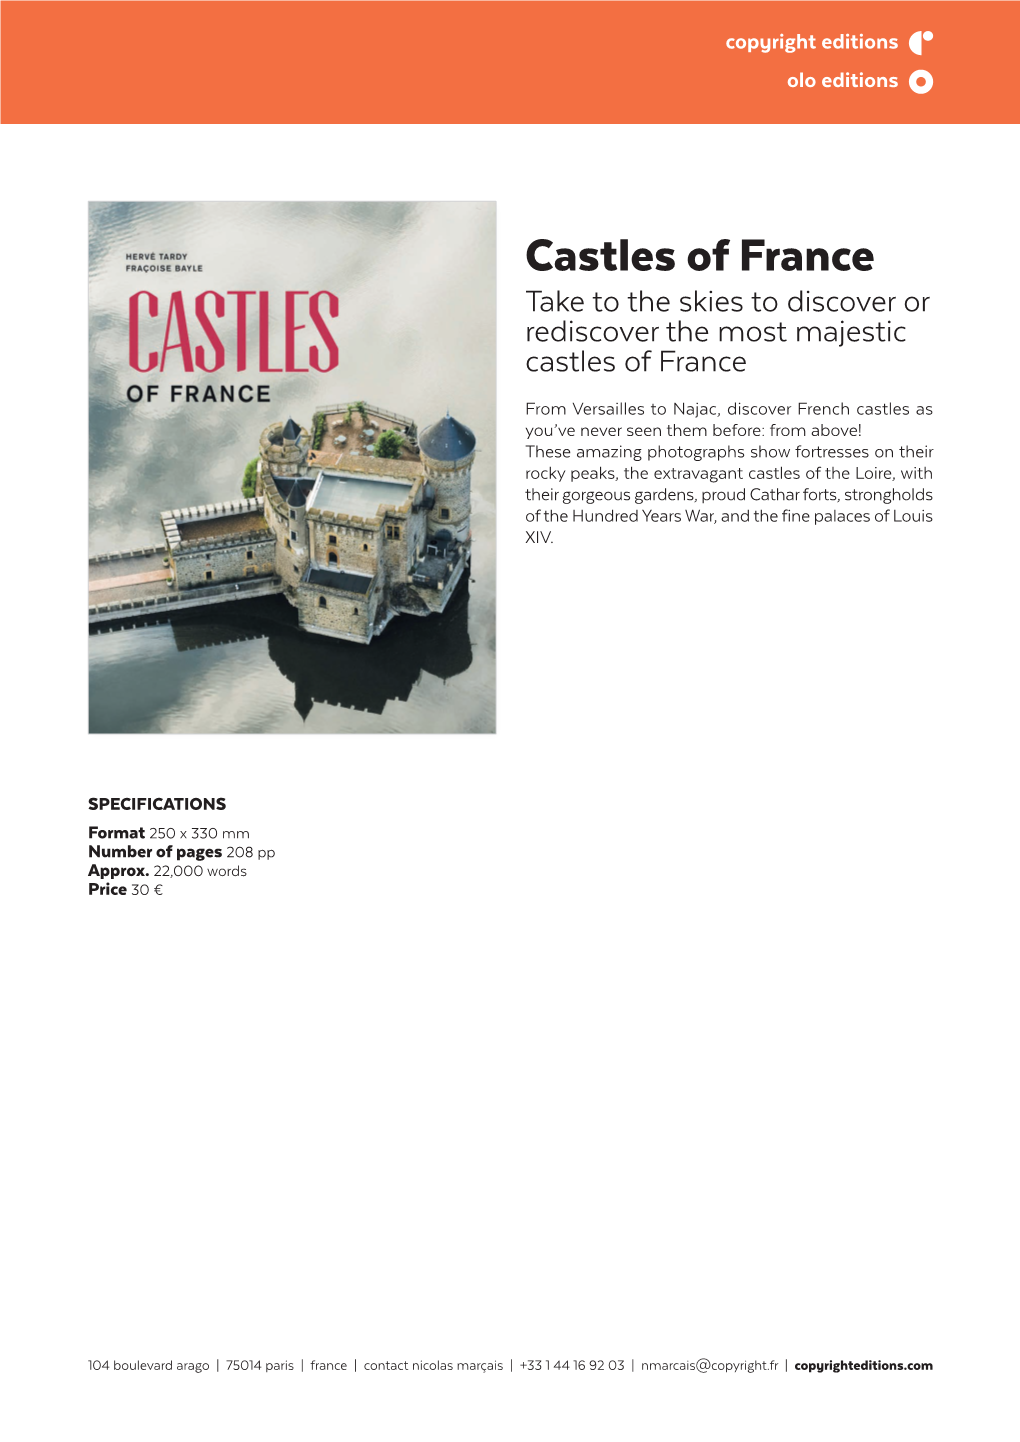 Castles of France Take to the Skies to Discover Or Rediscover the Most Majestic Castles of France